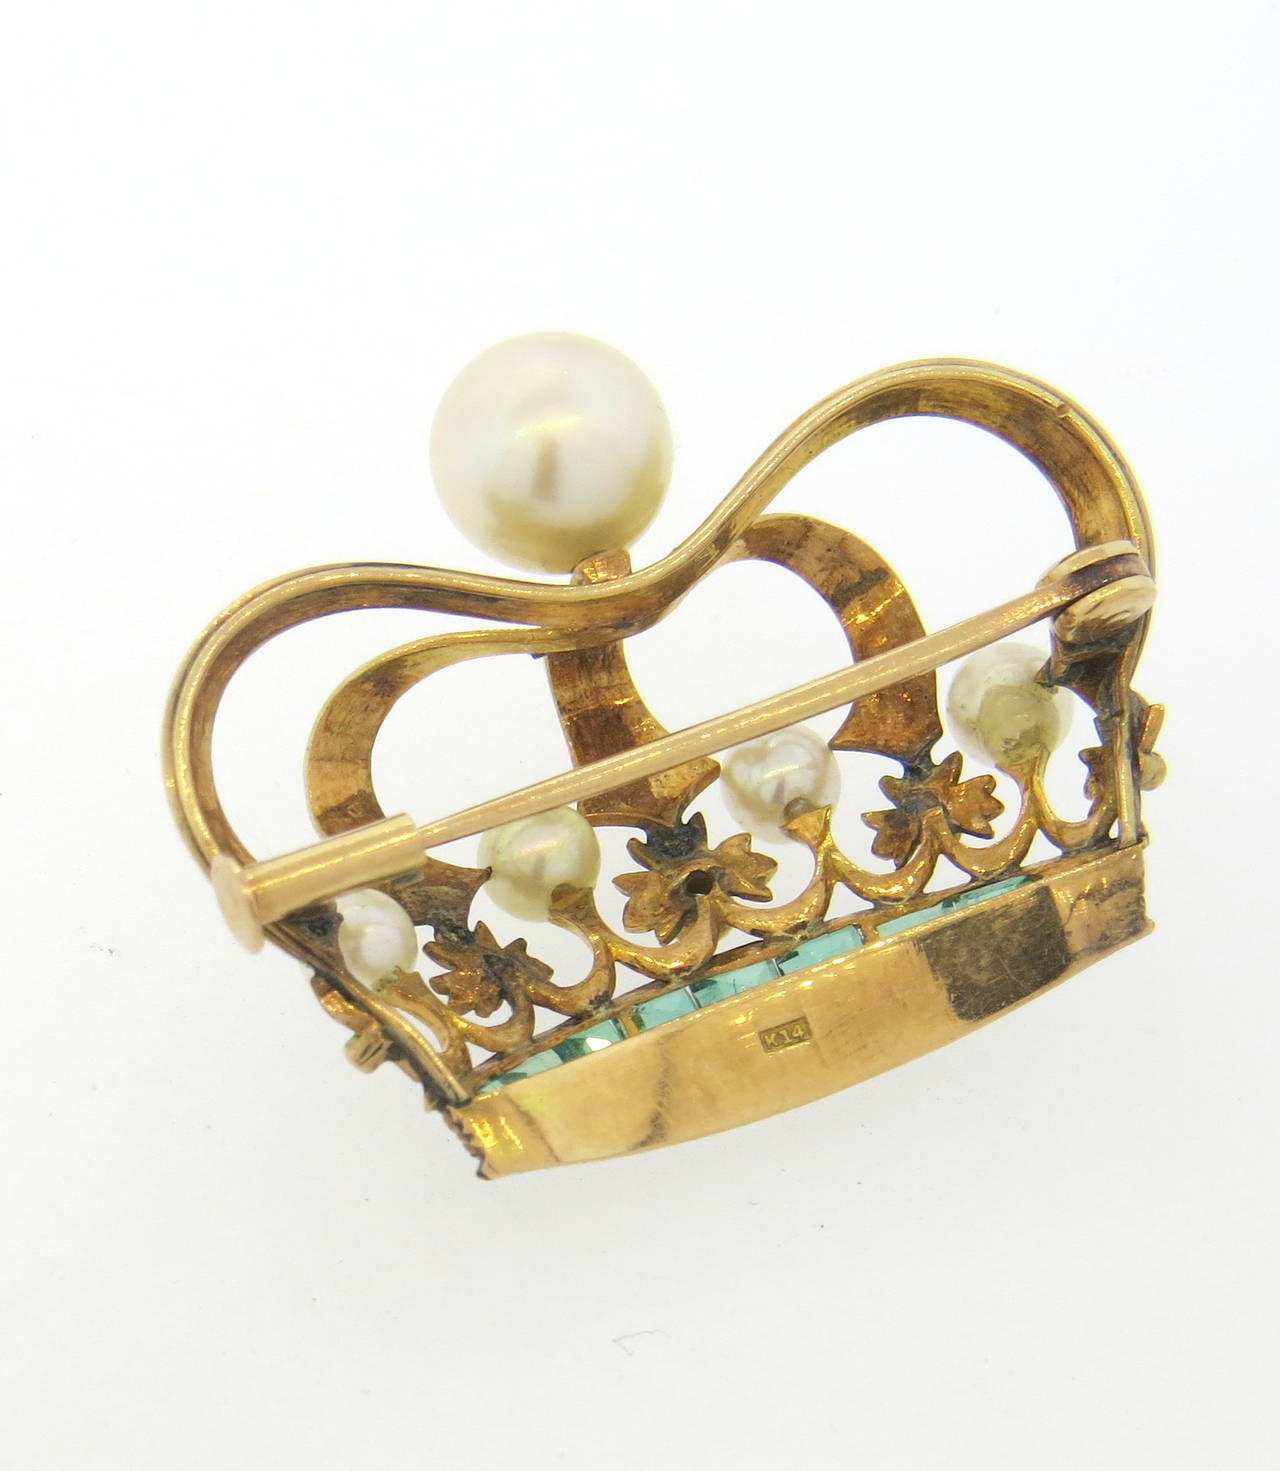 Antique 14k gold crown brooch, set with a diamond, emeralds and five pearls. Brooch measures 32mm x 25mm. Marked k14. Weight - 5 grams